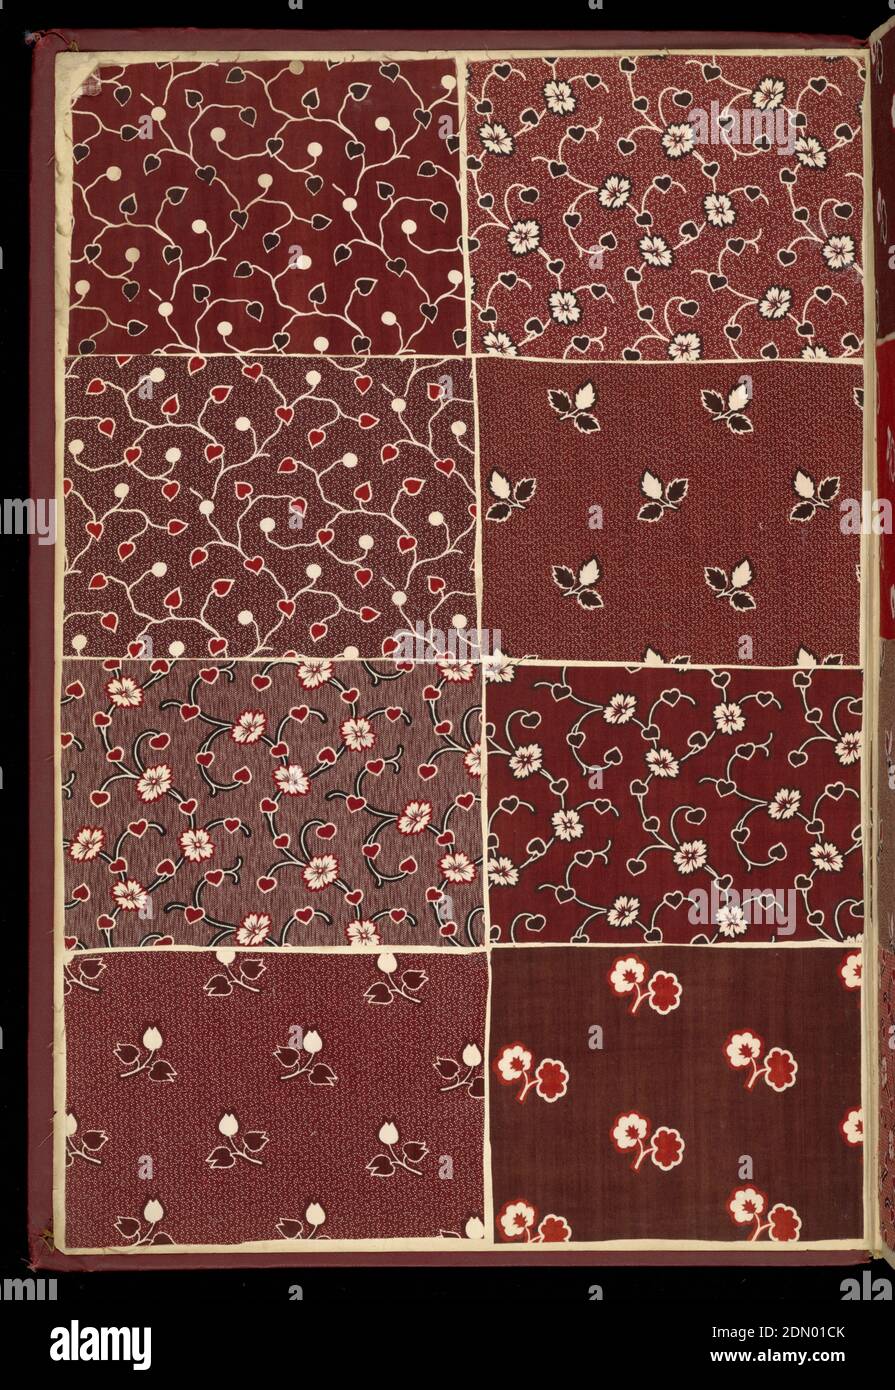 Sample book, Medium: paper, printed cotton textile samples, Oversized red cloth bound book with 2,239 French textile samples. Very good condition and quality. Predominantly dark colors and earth tones., France, 1850, sample books, Sample book Stock Photo